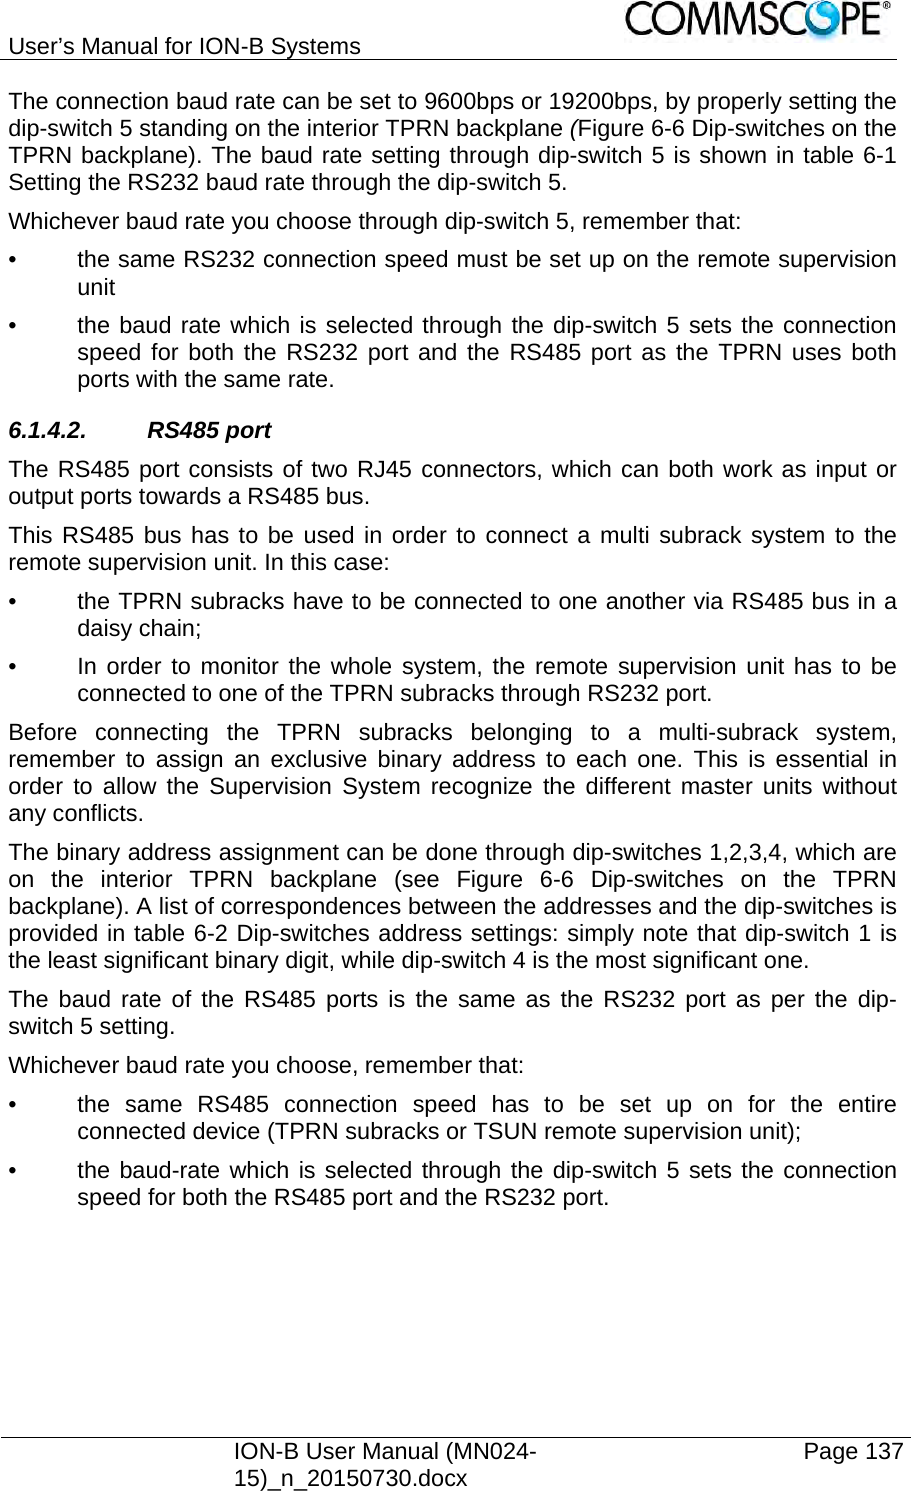 User’s Manual for ION-B Systems    ION-B User Manual (MN024-15)_n_20150730.docx  Page 137 The connection baud rate can be set to 9600bps or 19200bps, by properly setting the dip-switch 5 standing on the interior TPRN backplane (Figure 6-6 Dip-switches on the TPRN backplane). The baud rate setting through dip-switch 5 is shown in table 6-1 Setting the RS232 baud rate through the dip-switch 5. Whichever baud rate you choose through dip-switch 5, remember that: •  the same RS232 connection speed must be set up on the remote supervision unit  •  the baud rate which is selected through the dip-switch 5 sets the connection speed for both the RS232 port and the RS485 port as the TPRN uses both ports with the same rate. 6.1.4.2. RS485 port The RS485 port consists of two RJ45 connectors, which can both work as input or output ports towards a RS485 bus. This RS485 bus has to be used in order to connect a multi subrack system to the remote supervision unit. In this case: •  the TPRN subracks have to be connected to one another via RS485 bus in a daisy chain; •  In order to monitor the whole system, the remote supervision unit has to be connected to one of the TPRN subracks through RS232 port. Before connecting the TPRN subracks belonging to a multi-subrack system, remember to assign an exclusive binary address to each one. This is essential in order to allow the Supervision System recognize the different master units without any conflicts. The binary address assignment can be done through dip-switches 1,2,3,4, which are on the interior TPRN backplane (see Figure 6-6 Dip-switches on the TPRN backplane). A list of correspondences between the addresses and the dip-switches is provided in table 6-2 Dip-switches address settings: simply note that dip-switch 1 is the least significant binary digit, while dip-switch 4 is the most significant one. The baud rate of the RS485 ports is the same as the RS232 port as per the dip-switch 5 setting. Whichever baud rate you choose, remember that: •  the same RS485 connection speed has to be set up on for the entire connected device (TPRN subracks or TSUN remote supervision unit); •  the baud-rate which is selected through the dip-switch 5 sets the connection speed for both the RS485 port and the RS232 port.    